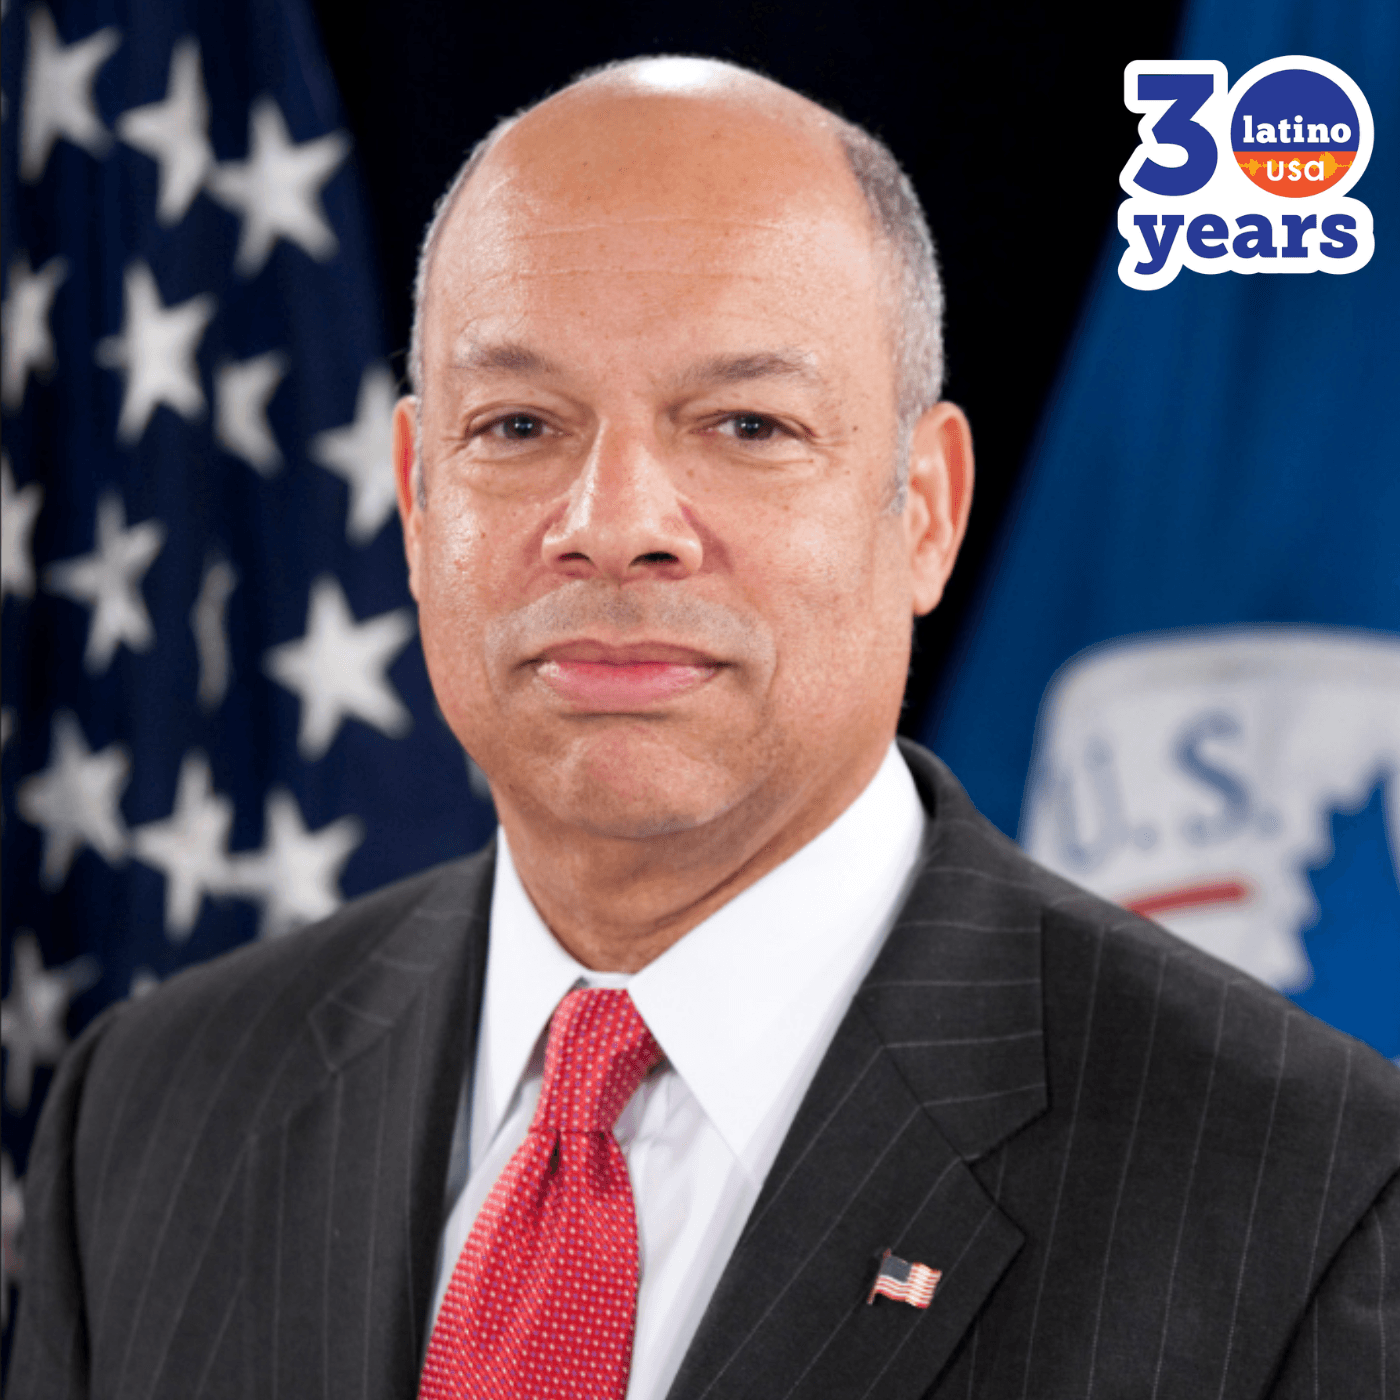 Thumbnail for "A Conversation With Jeh Johnson".